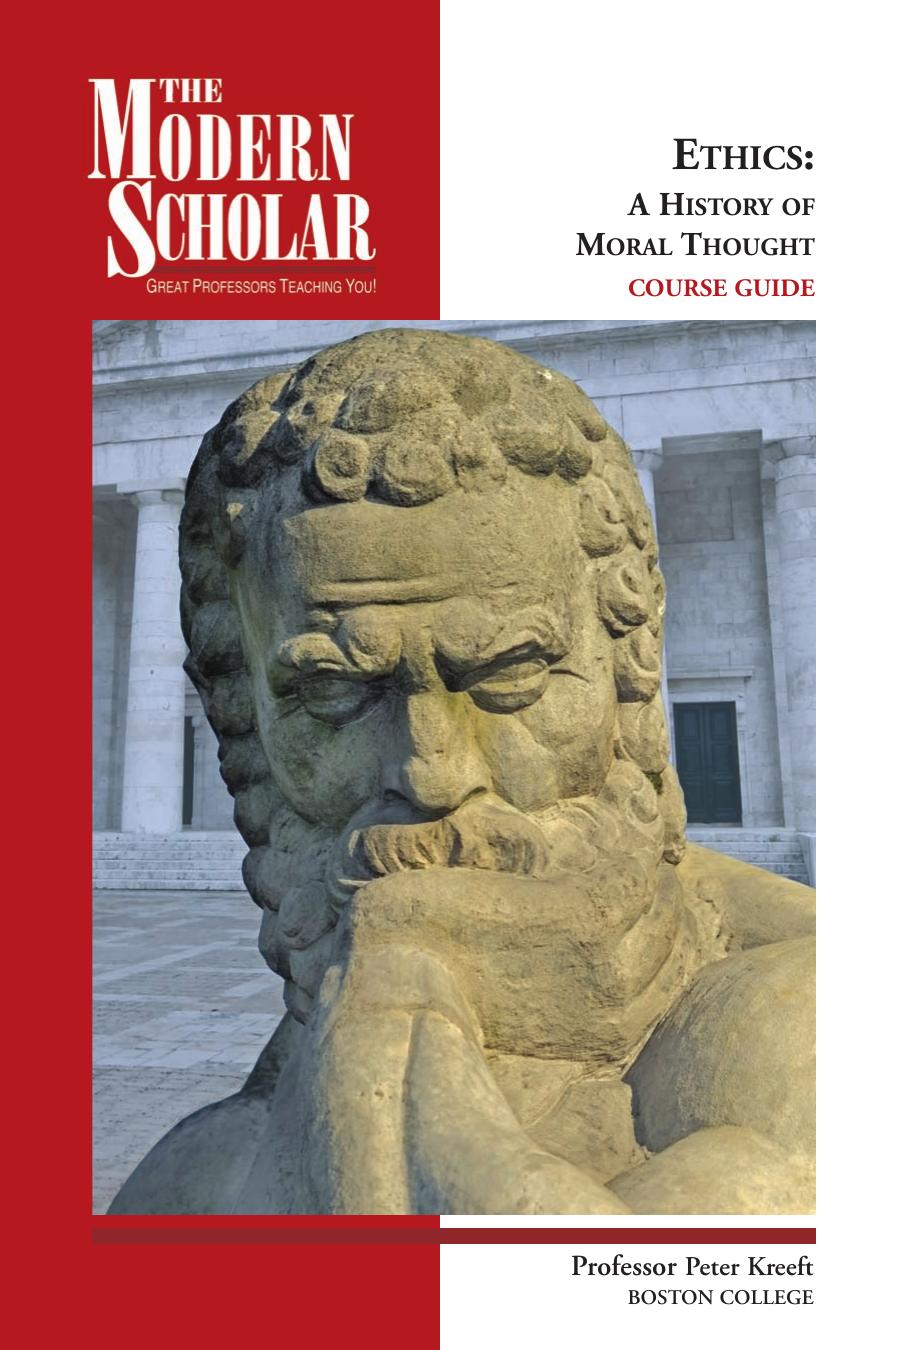 What Would Socrates Do?: The History of Moral Thought and Ethics